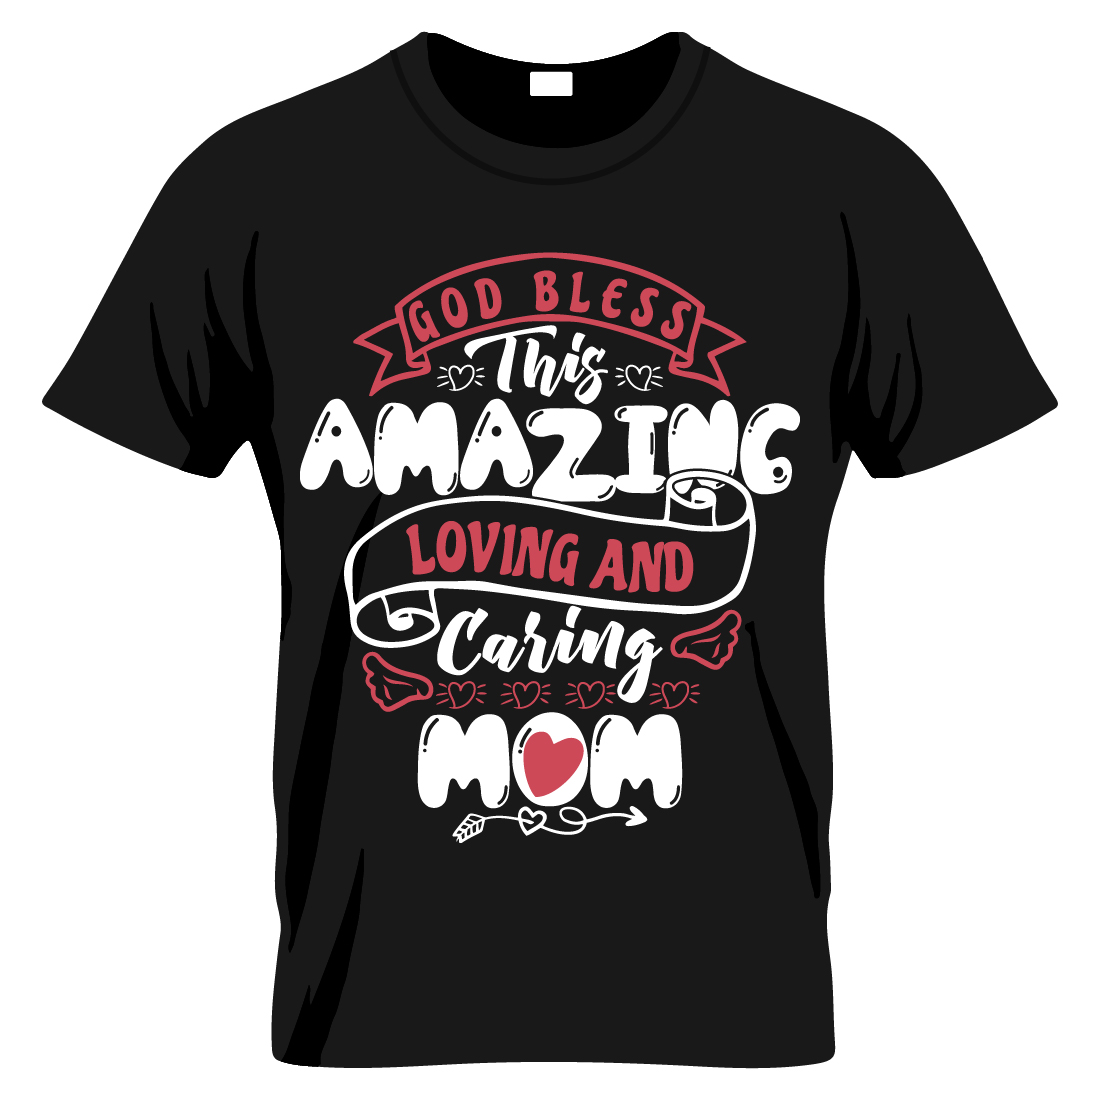 Loving and Caring mom t shirt cover image.